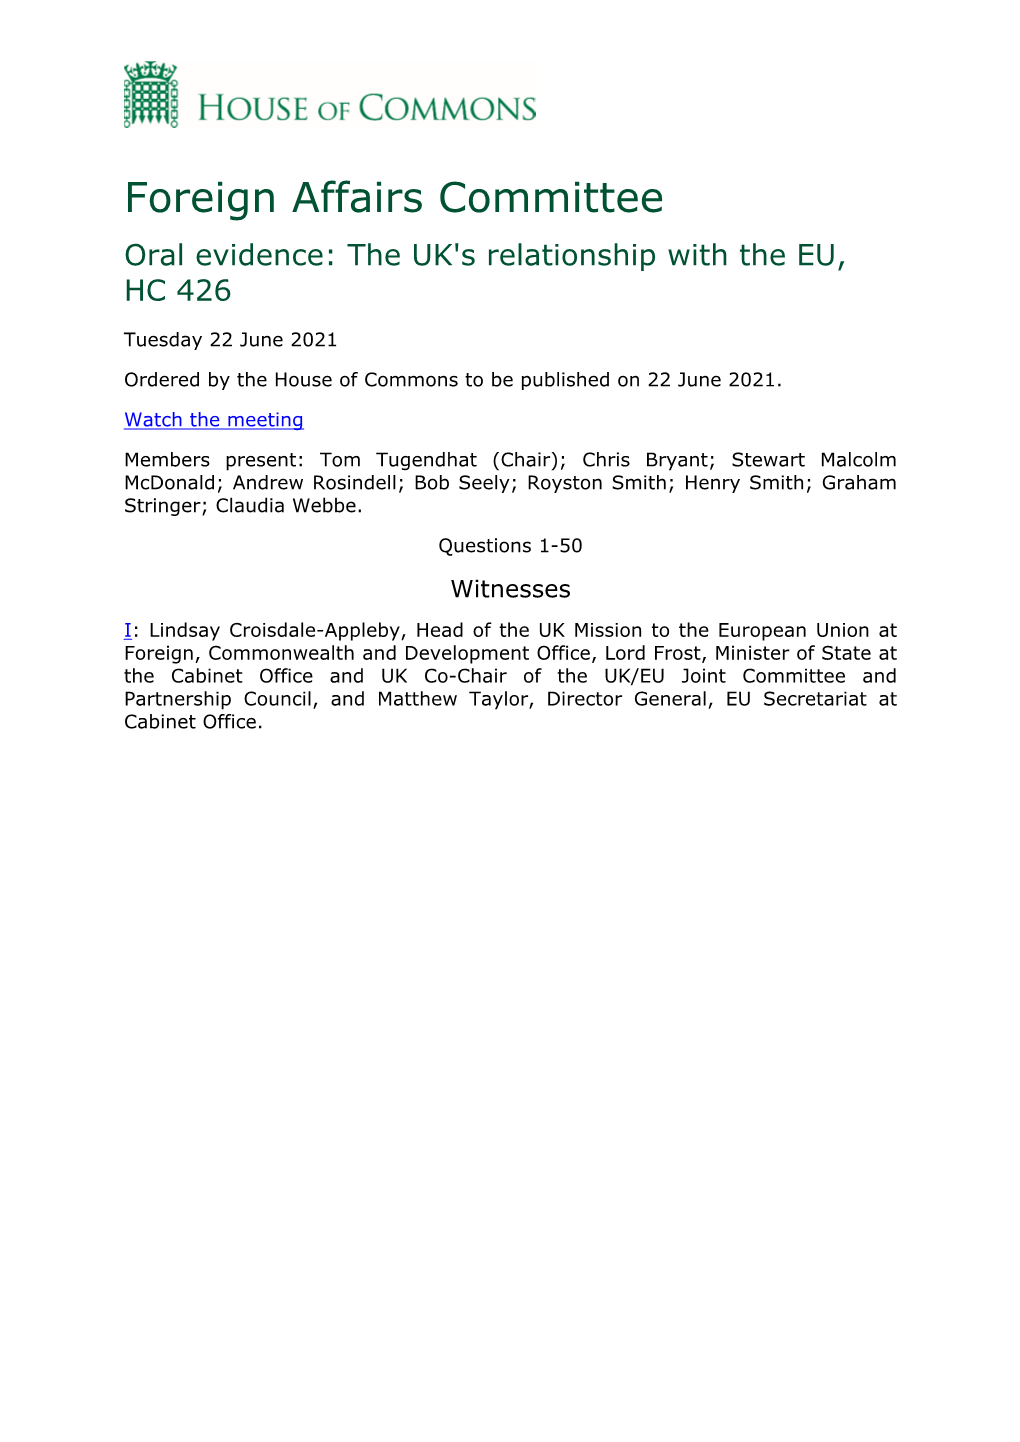 Foreign Affairs Committee Oral Evidence: the UK's Relationship with the EU, HC 426